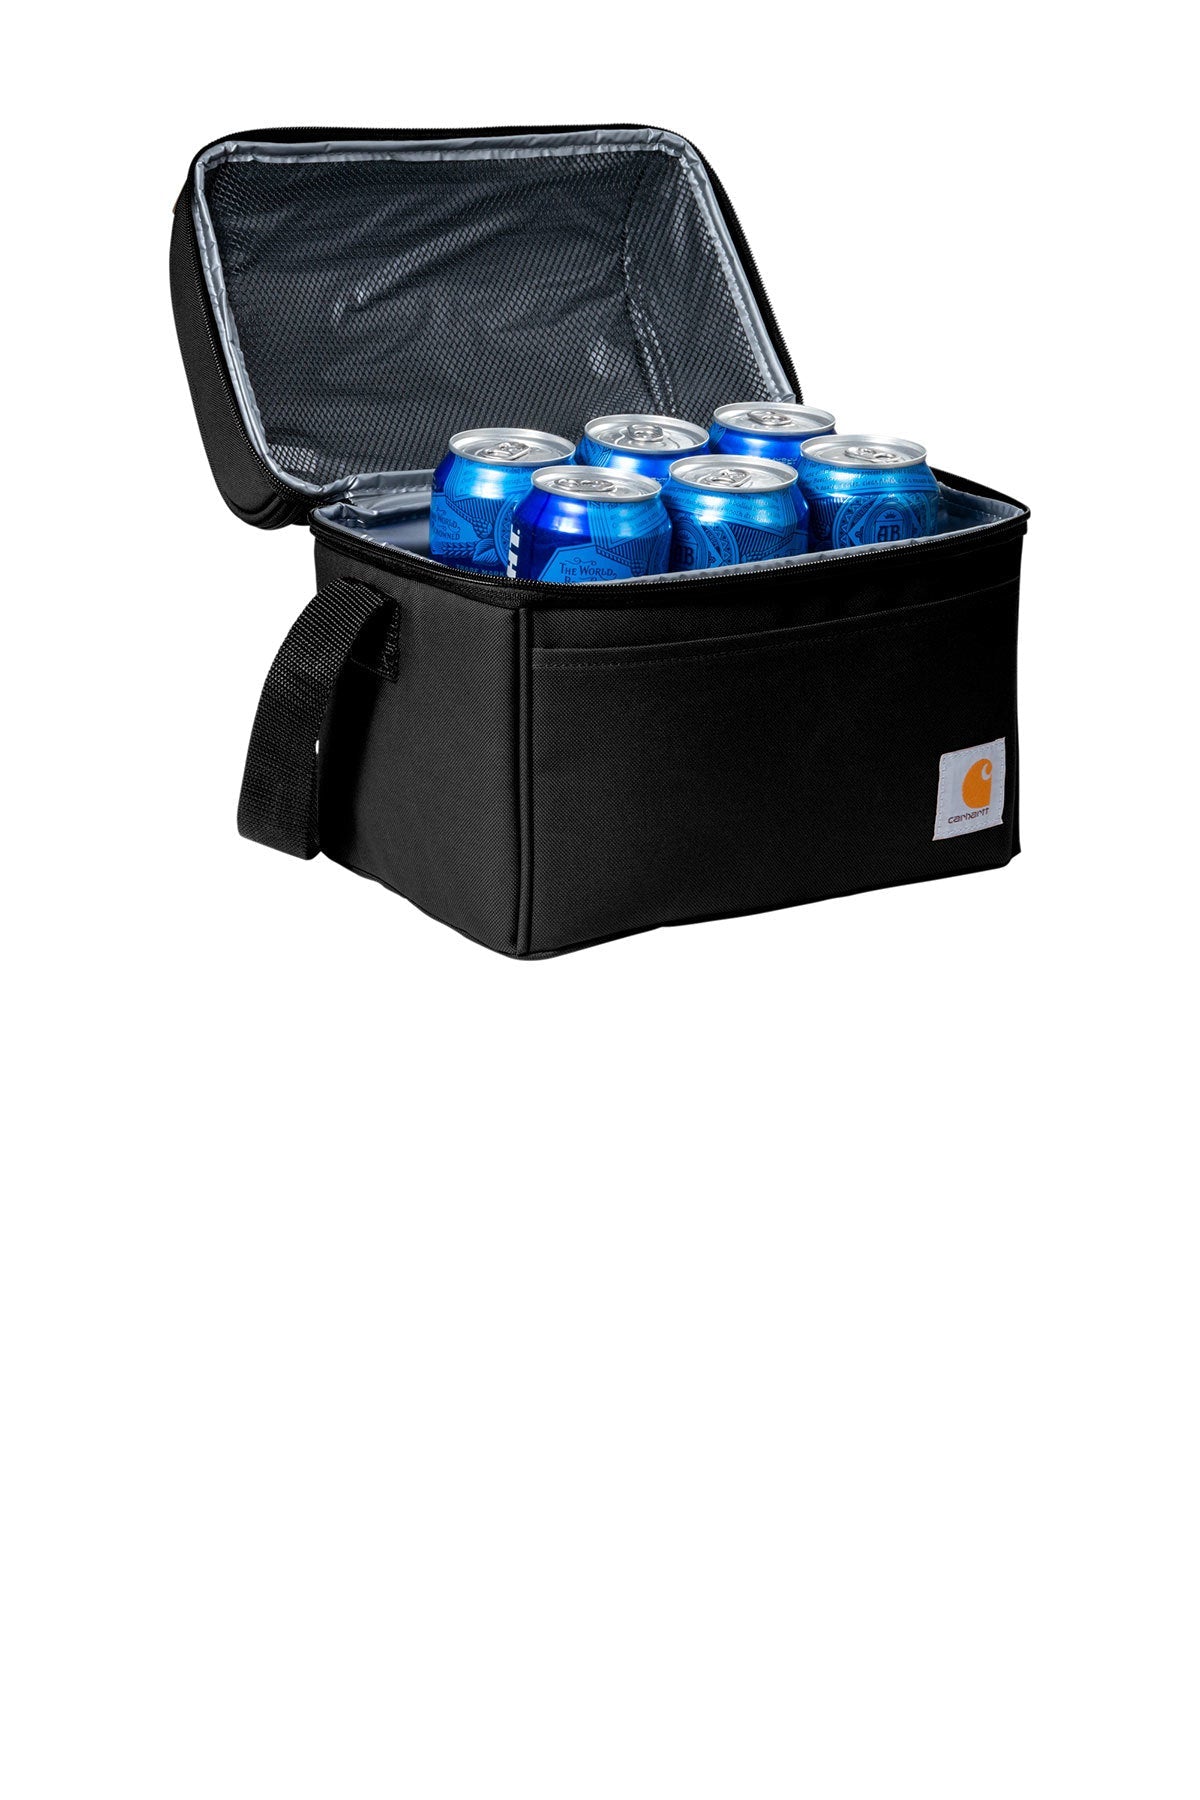 CT89251601 Carhartt® Lunch 6-Can Cooler